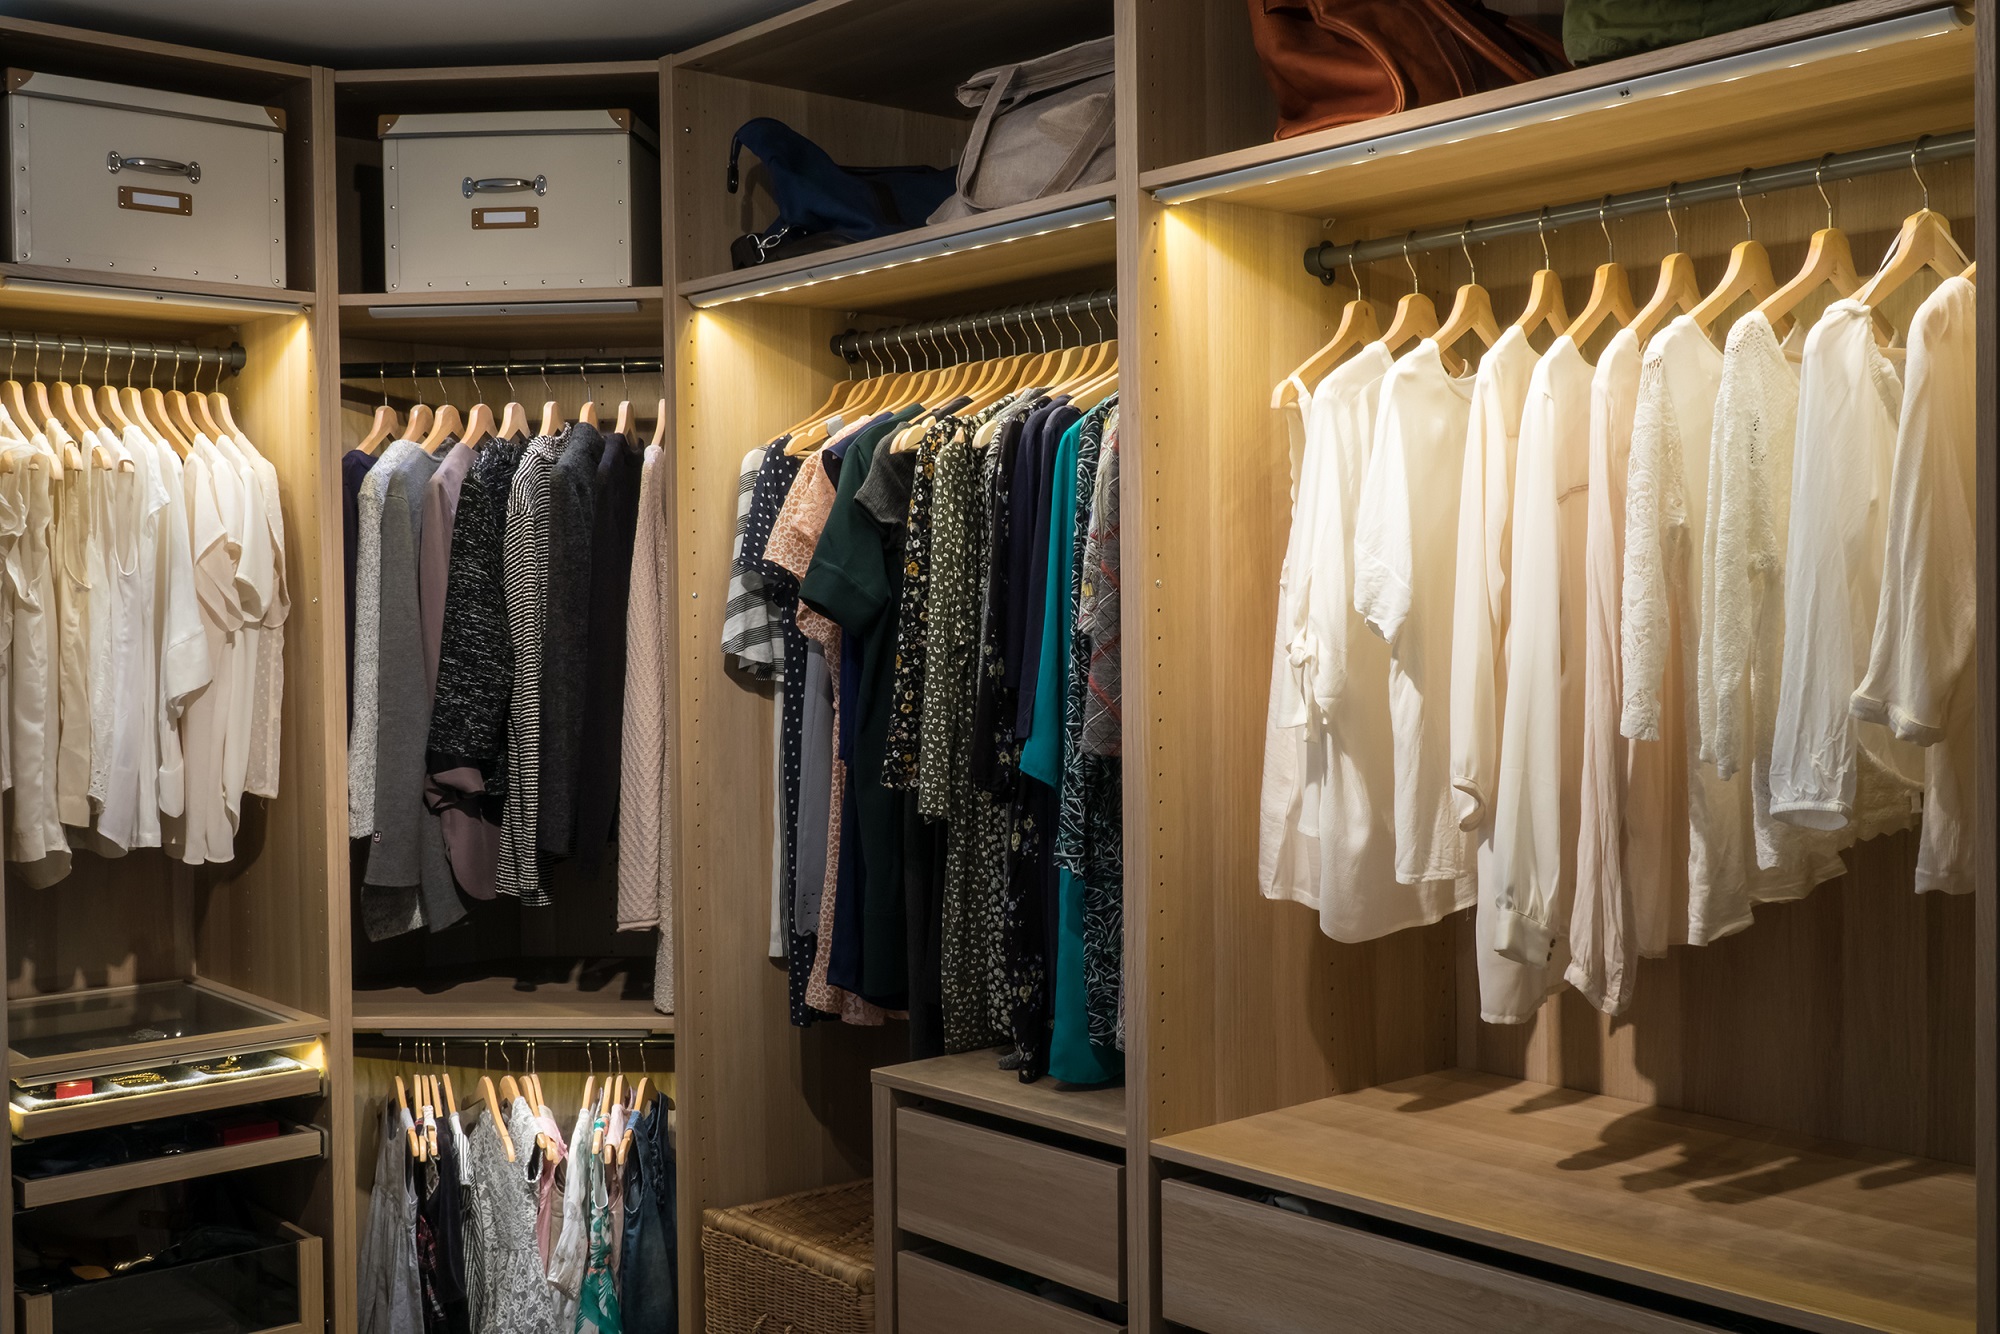 Tidy closet with hanging clothes